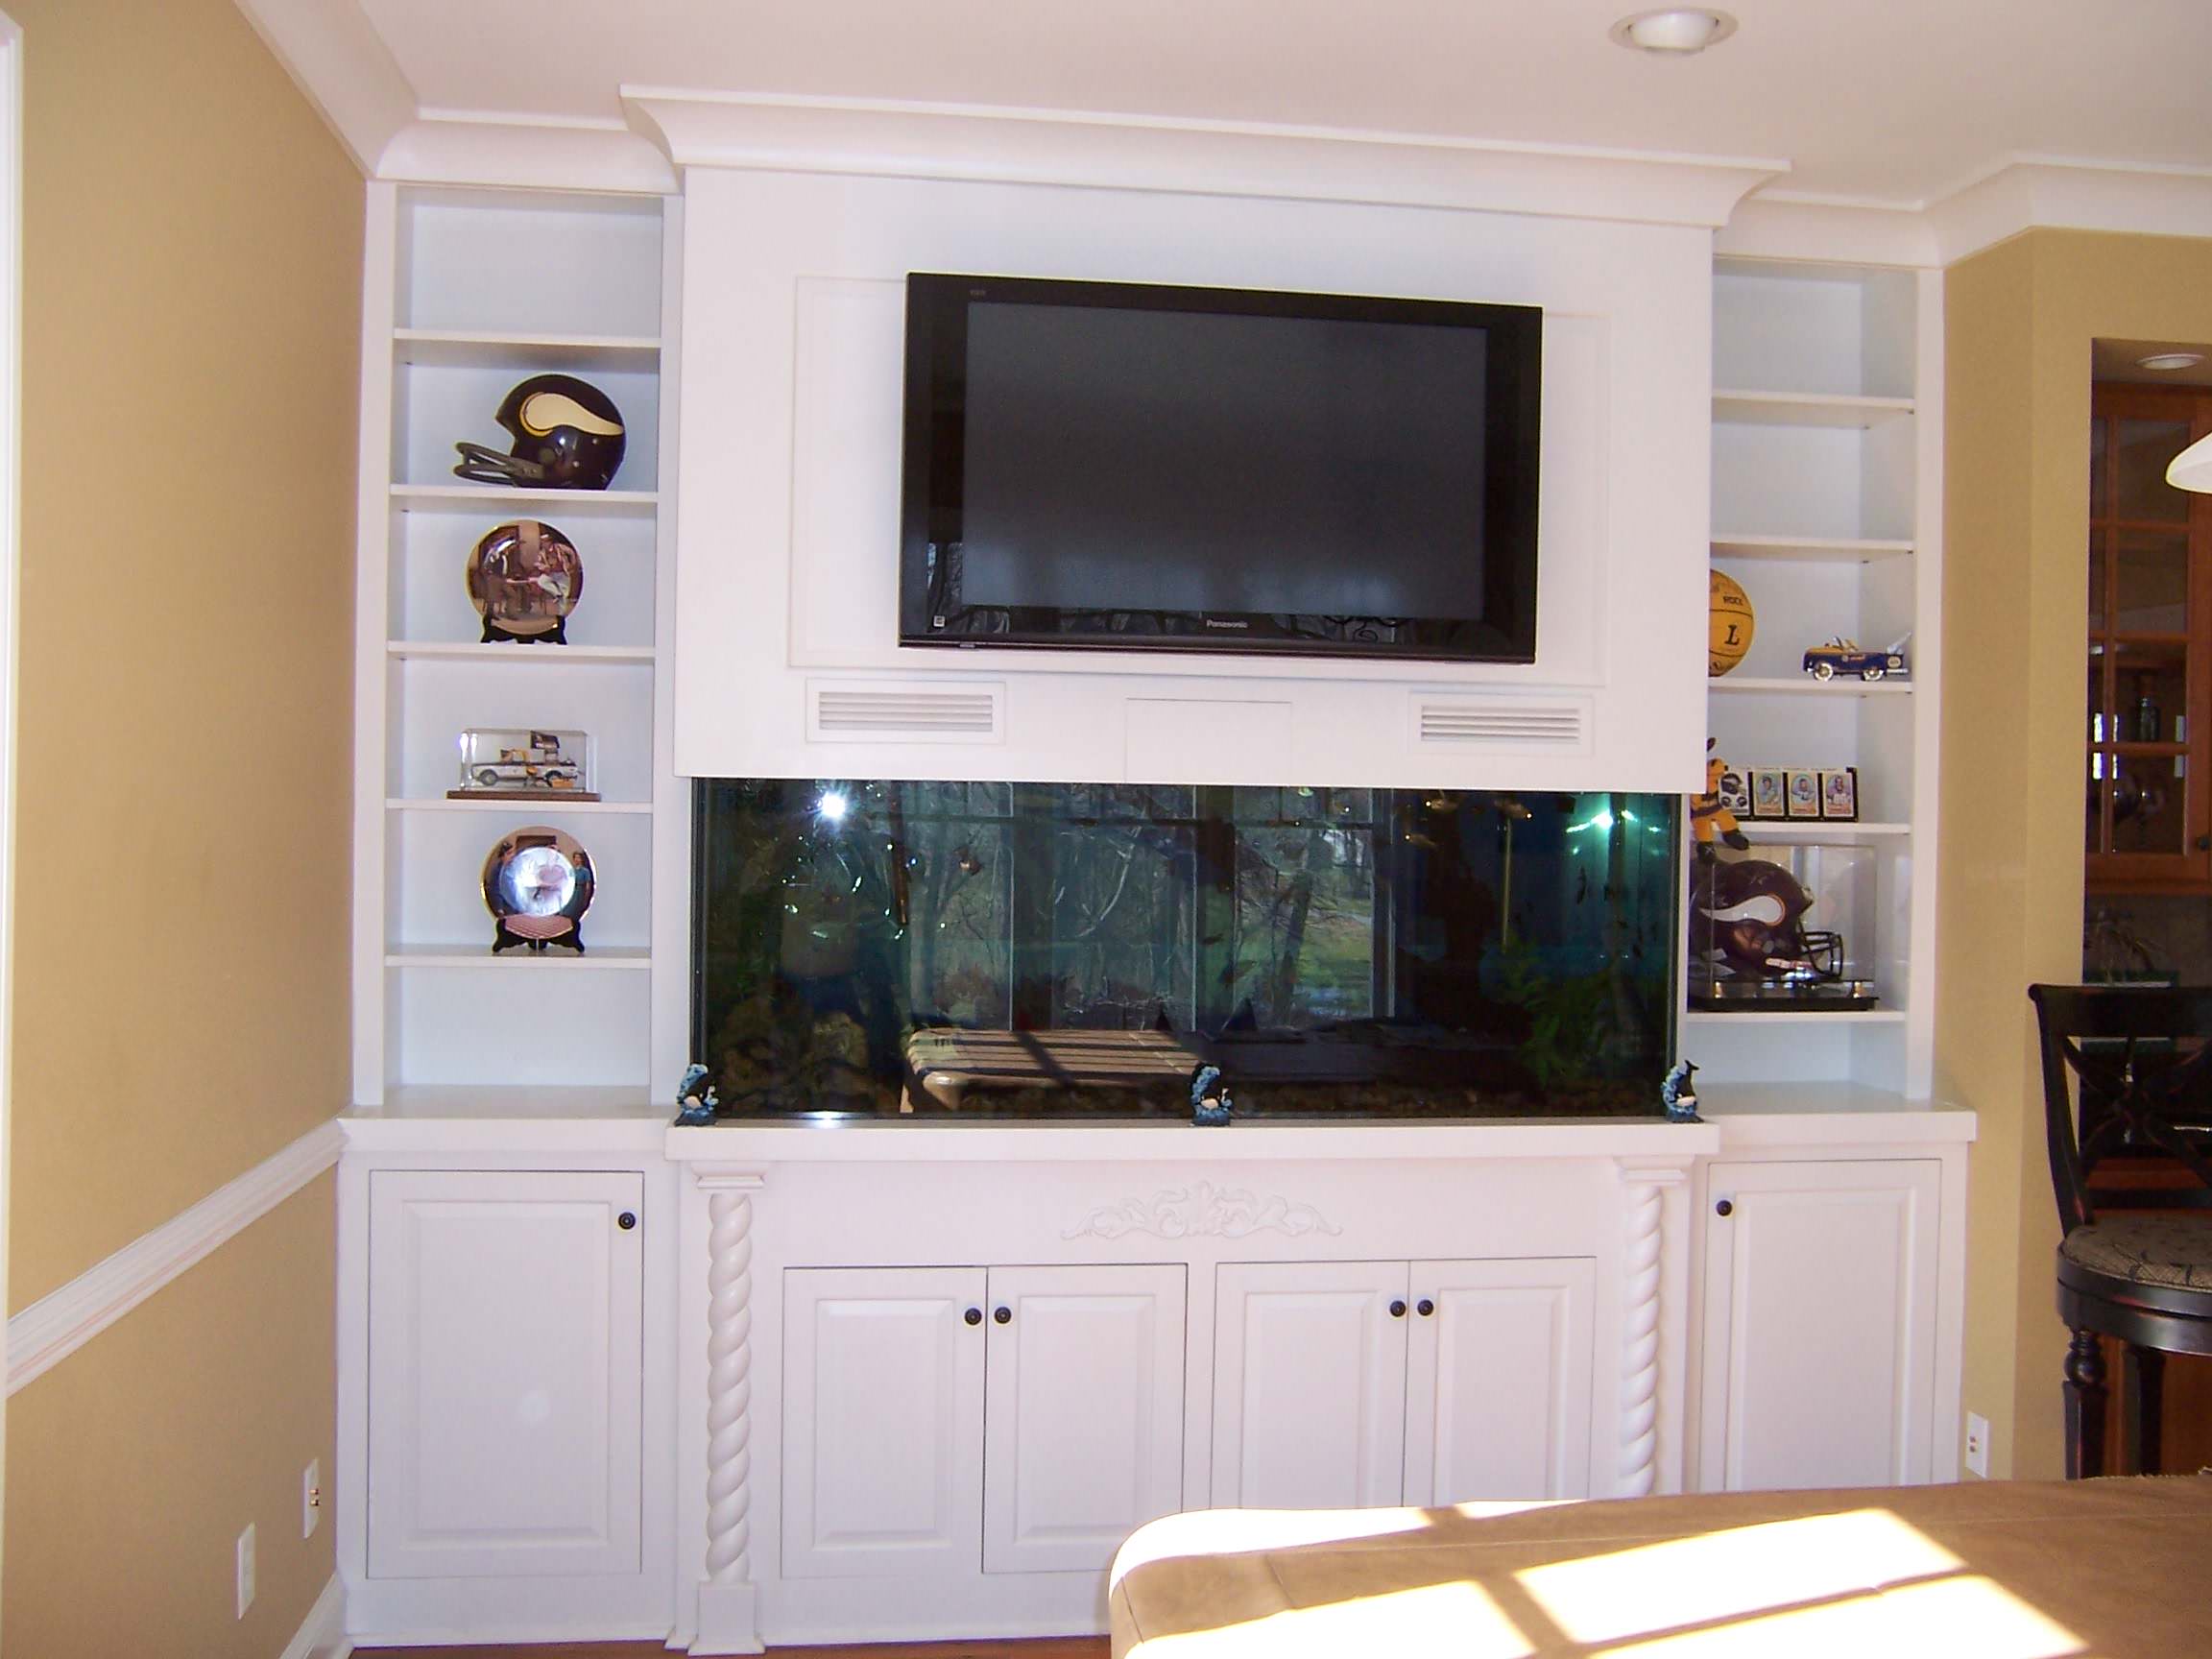 Built Ins With Tv And Fish Tank - Photos & Ideas | Houzz